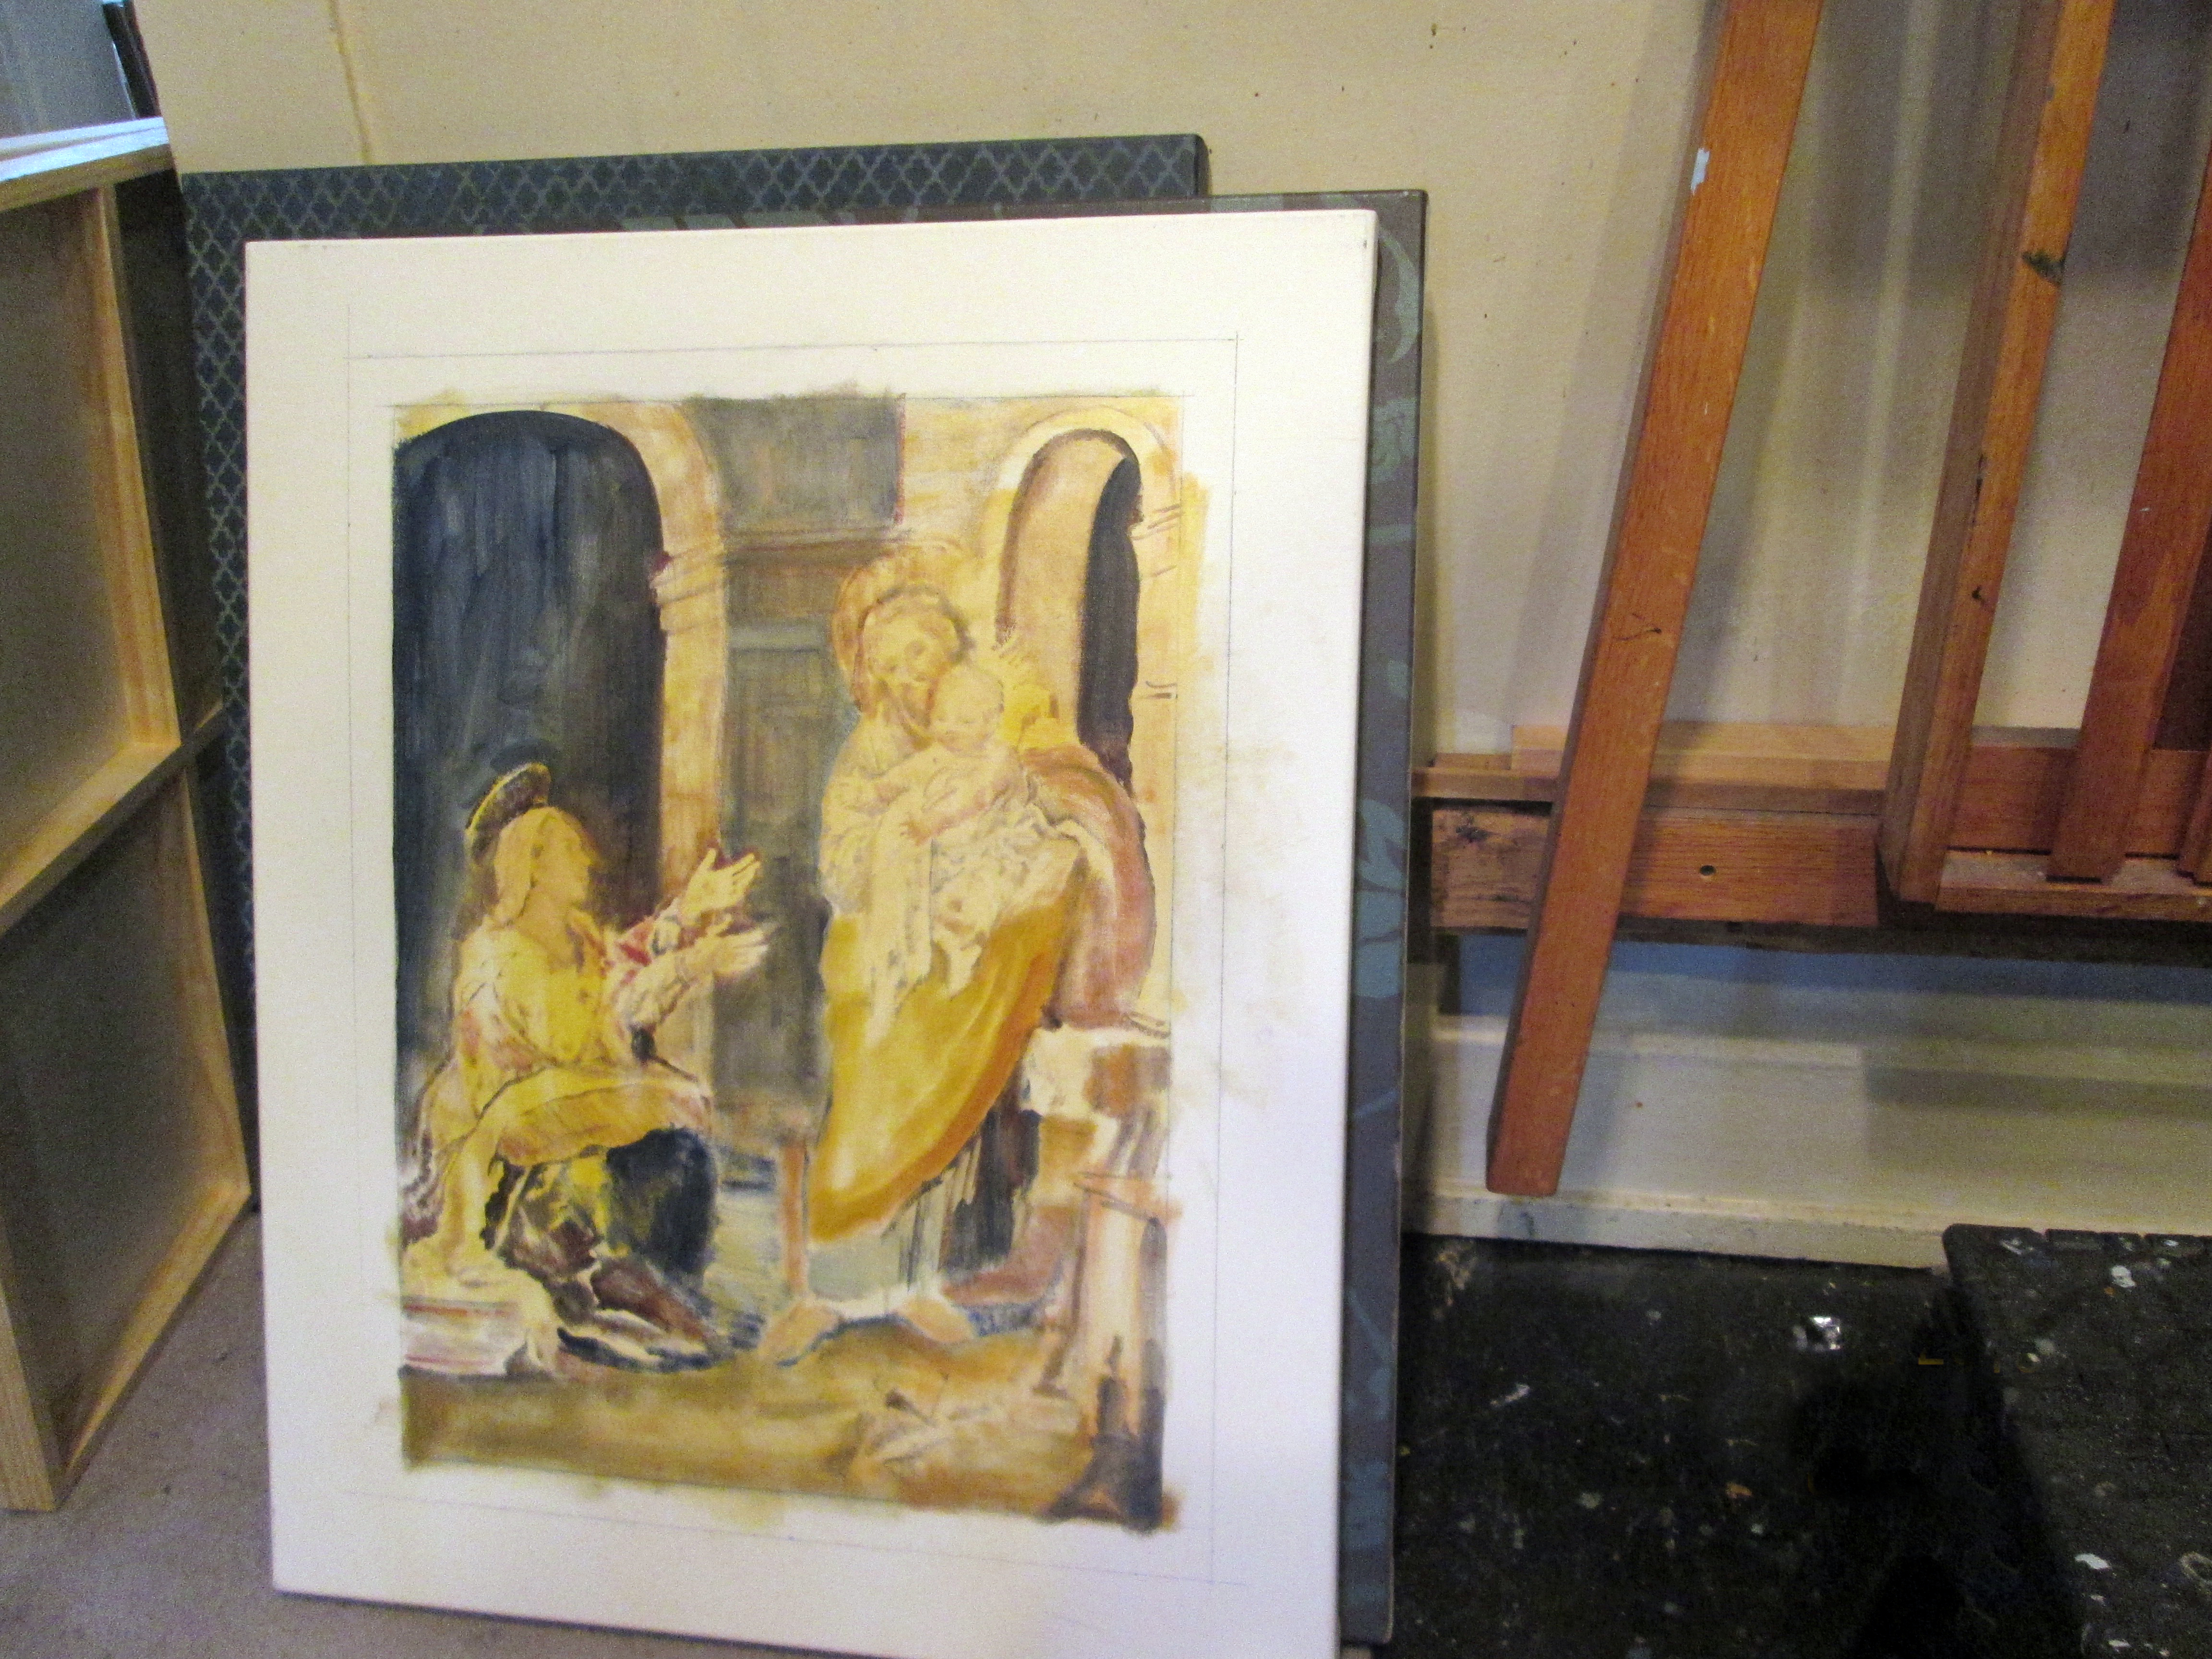 Work in progress of the painting titled "The Tiny Thimbles of the Harbell to Honor Our Lady?s Working Hands"